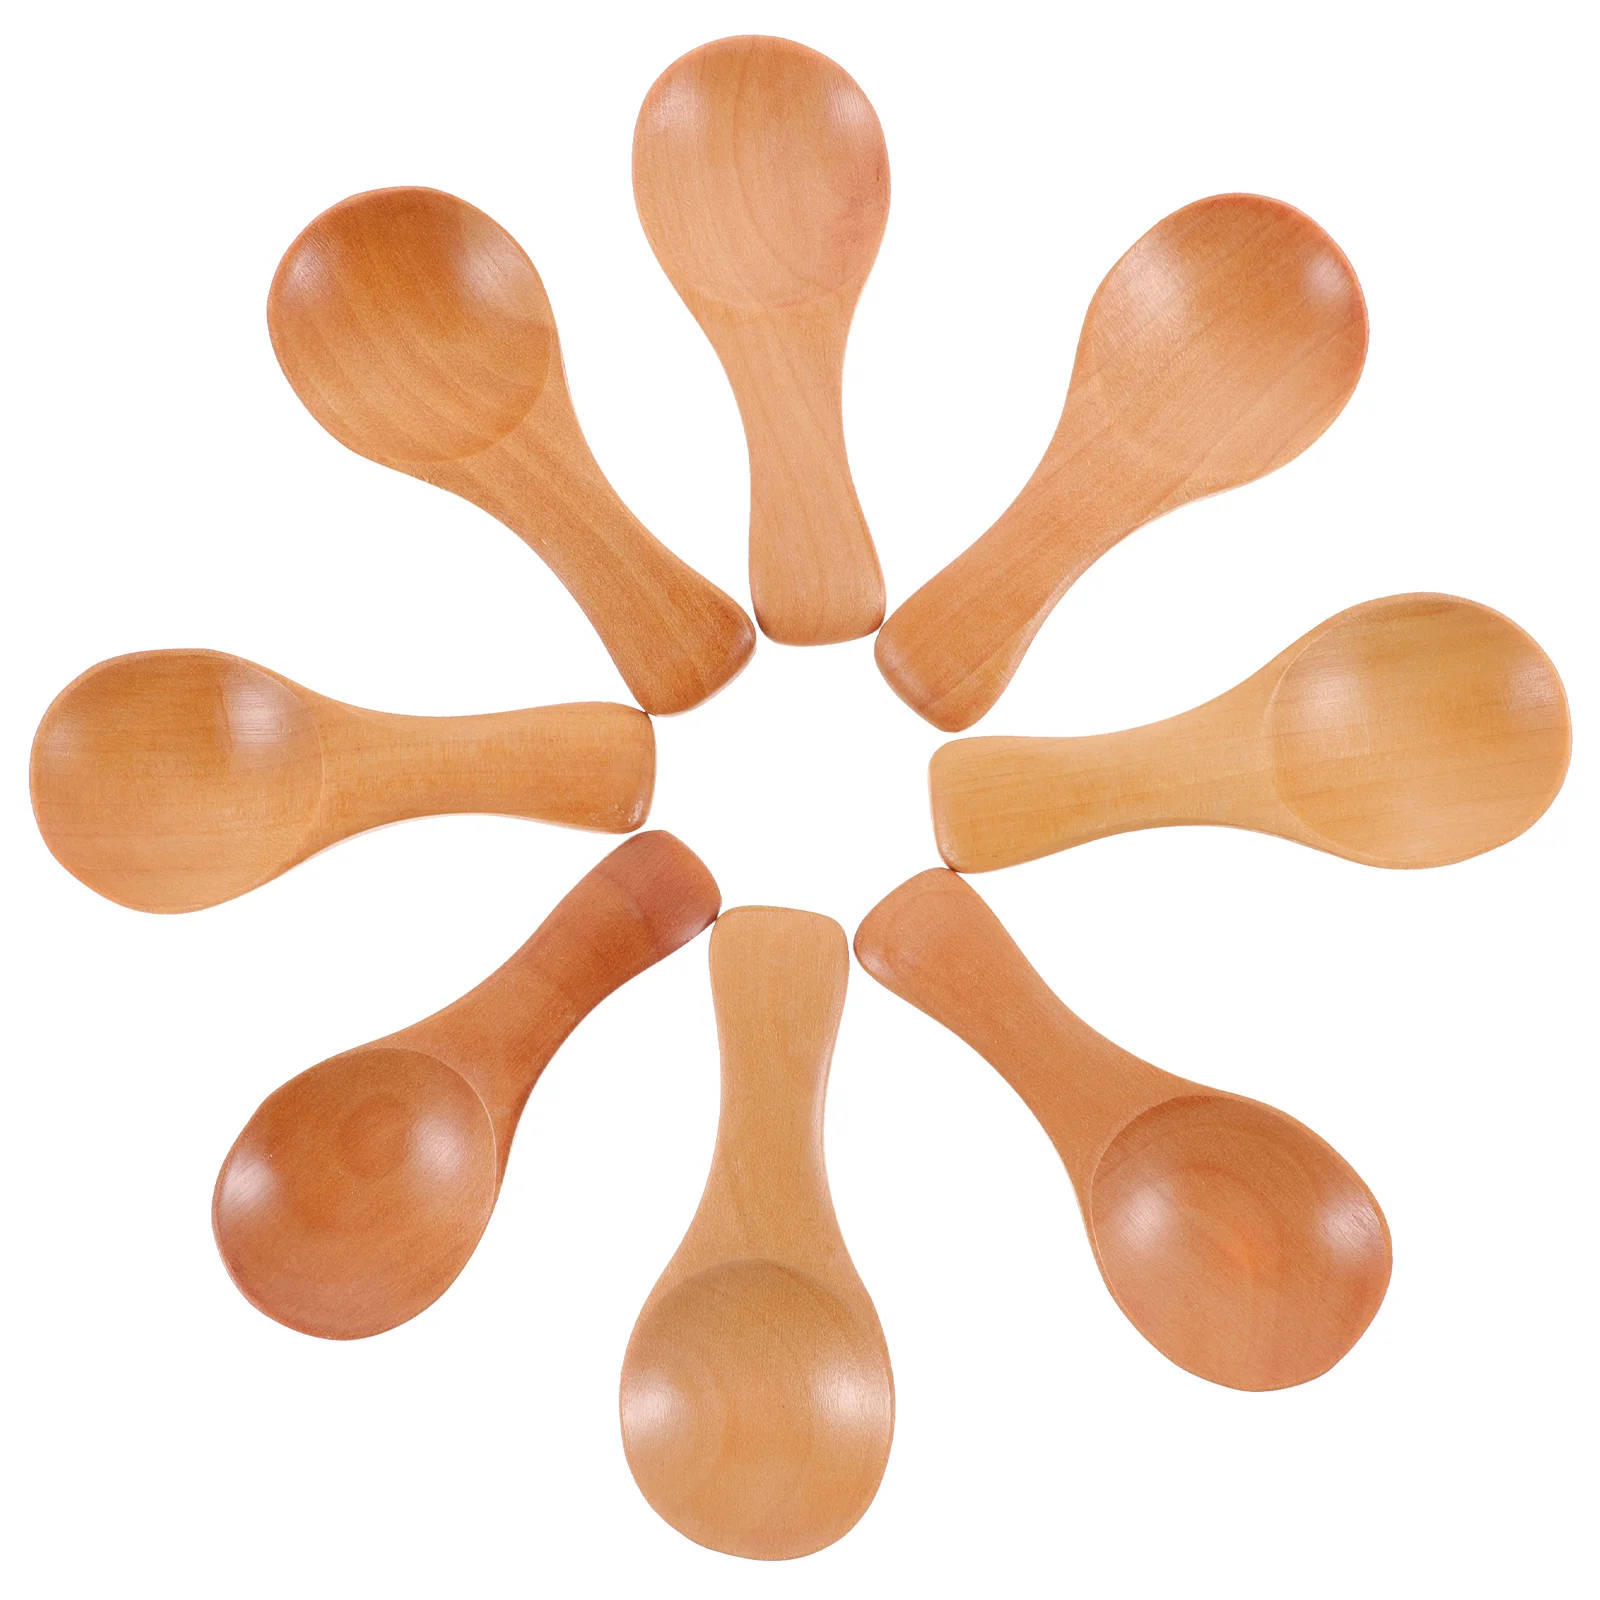 

10pcs Small Wooden Spoons Seasoning Spoons Reusable Wood Spoons Tea Scoops Kitchen Supplies